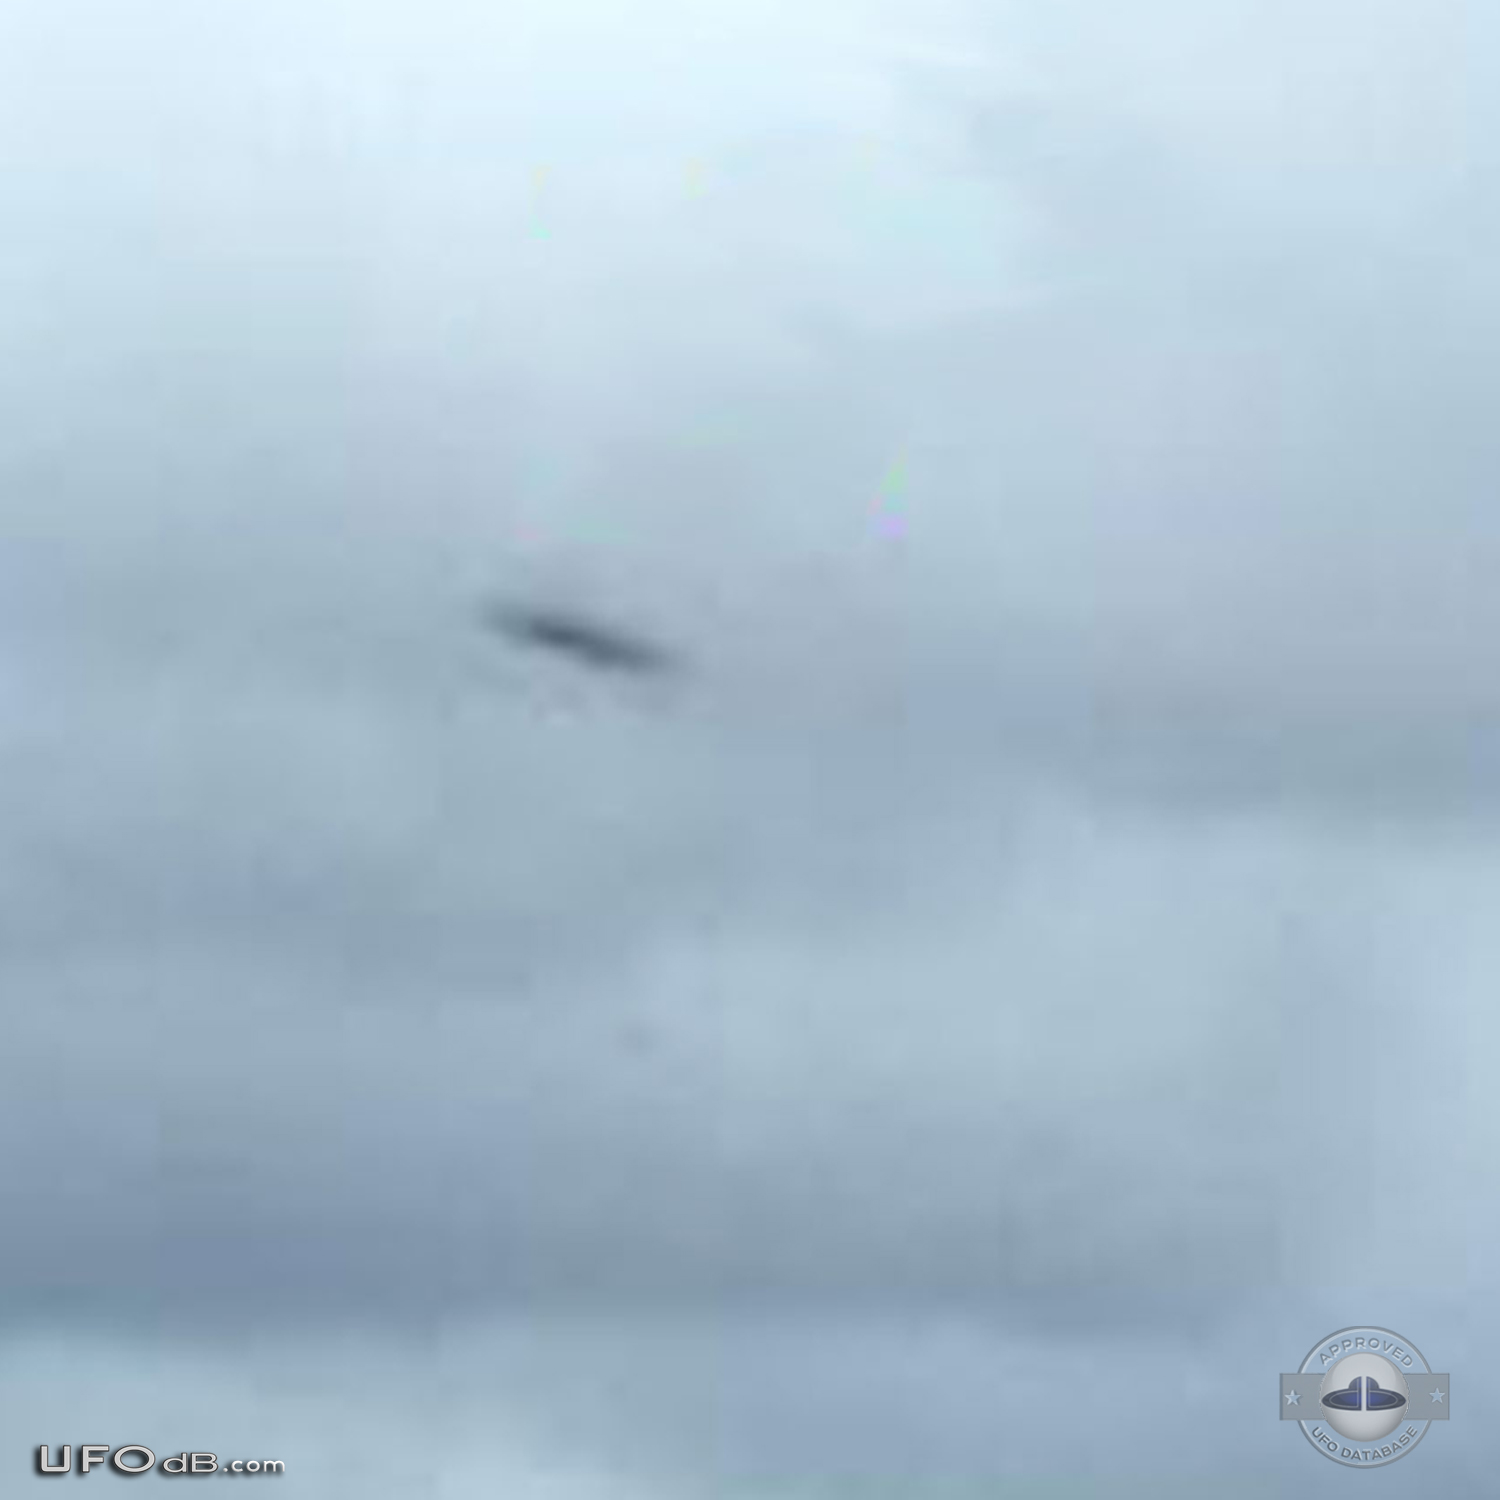 Saucer UFO caught on picture near Silbury Hill in Wiltshire county UK UFO Picture #480-5